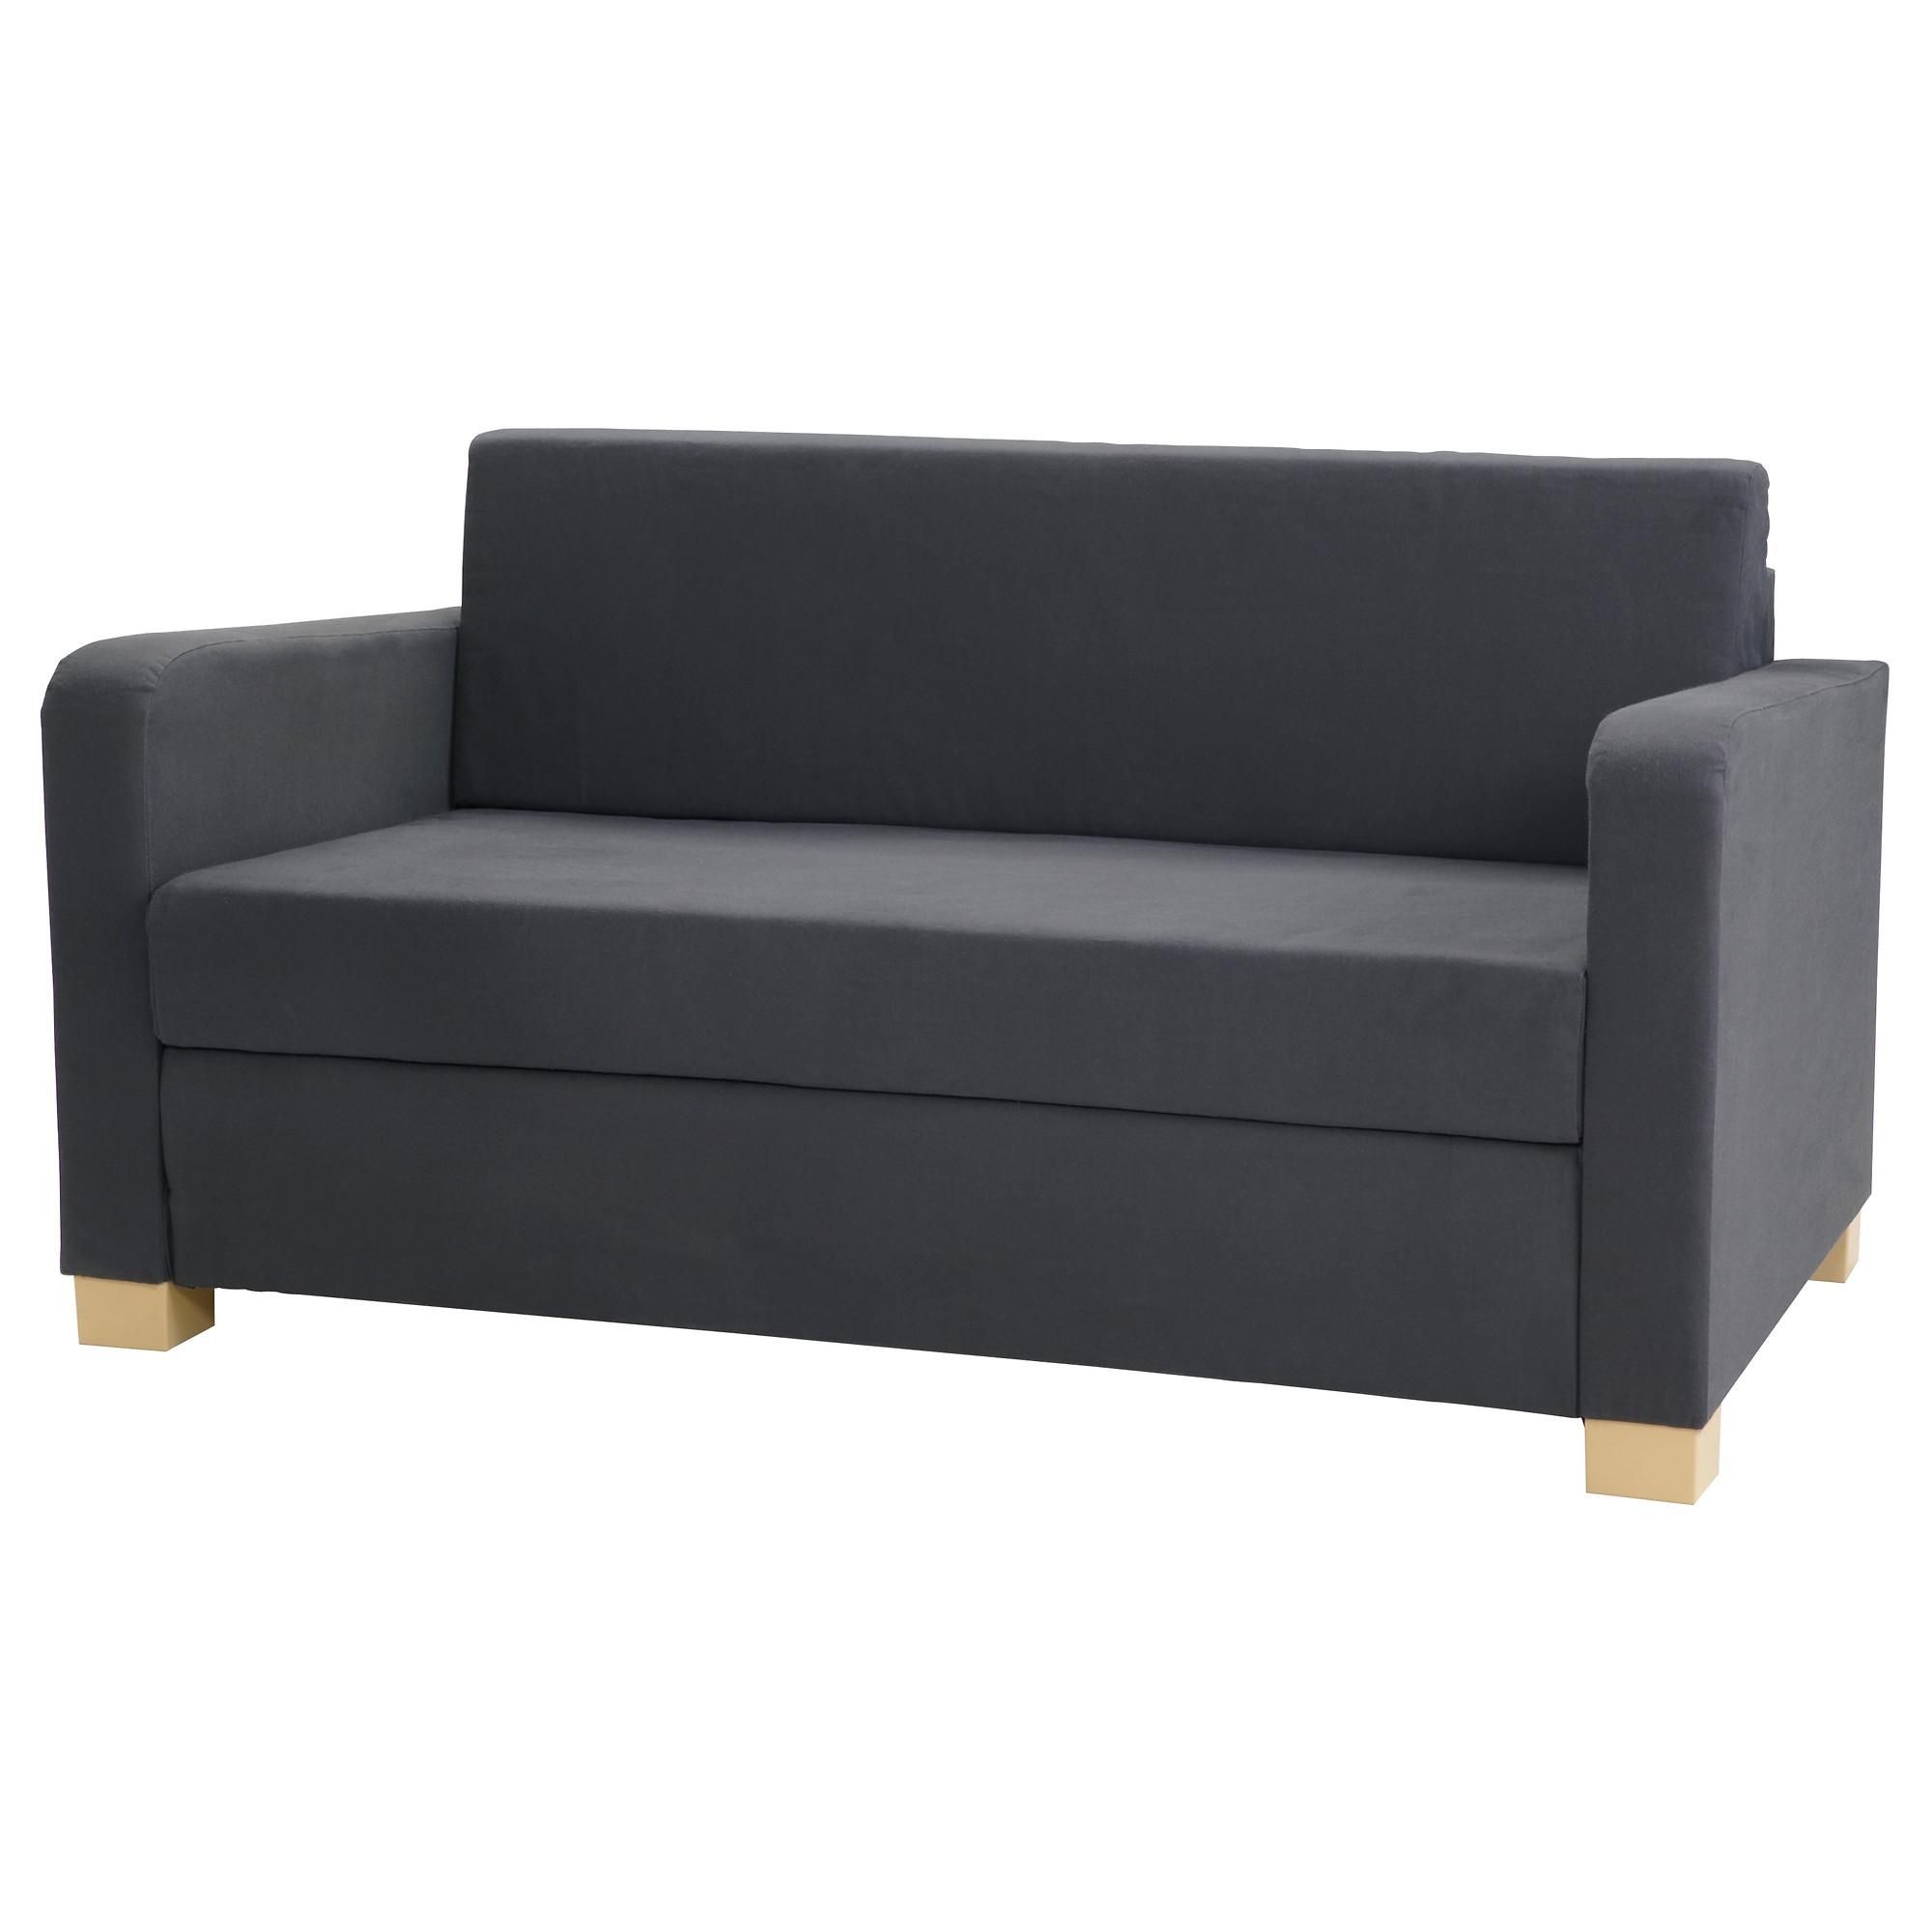 Sofa Beds & Futons – Ikea Within Fulton Sofa Beds (View 7 of 21)